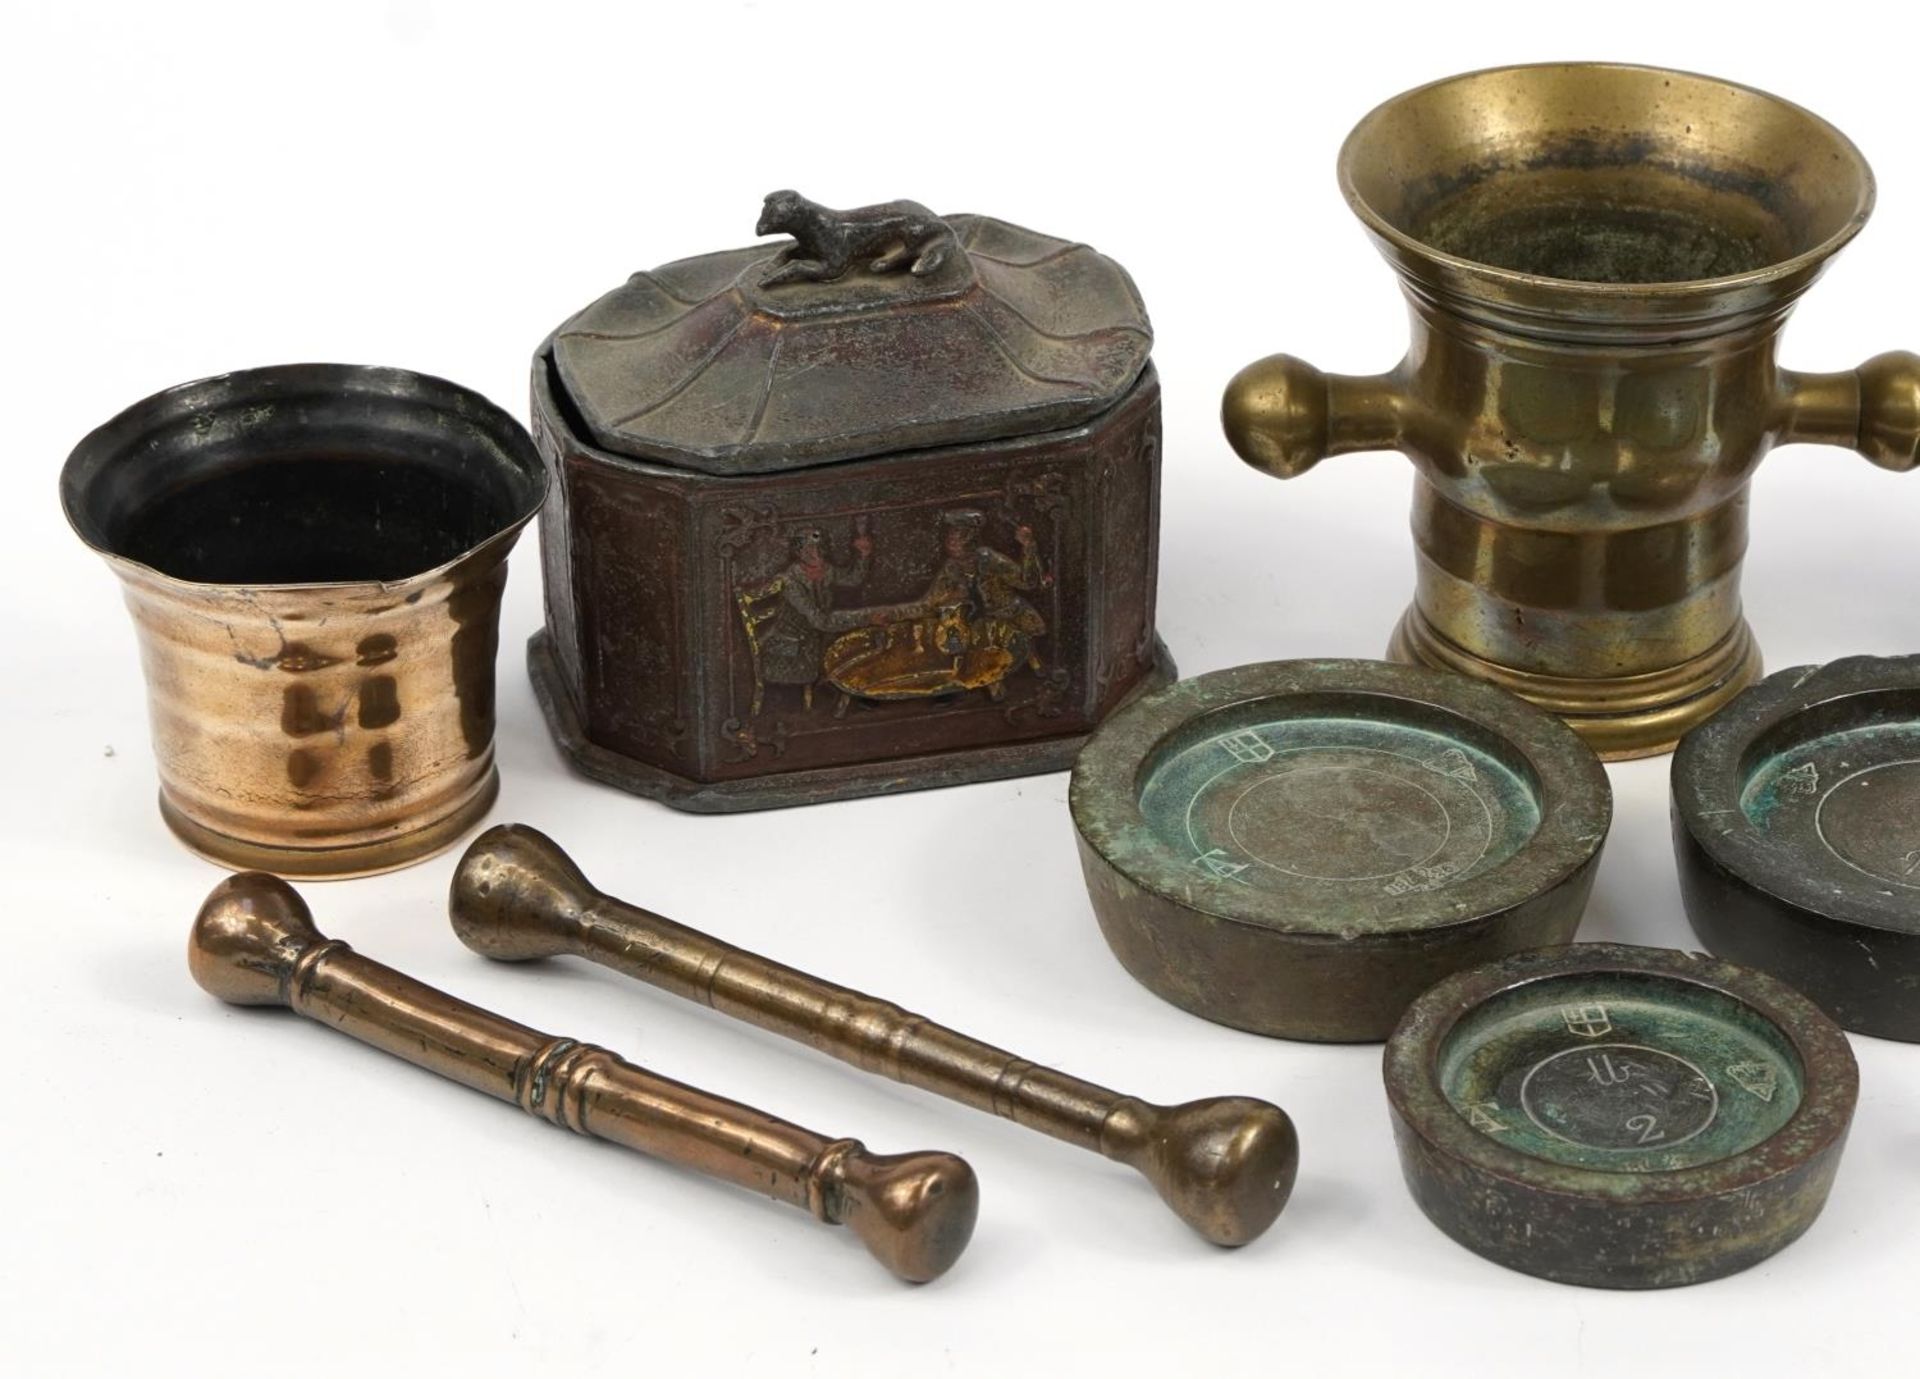 Metalware including an antique bronze pestle and mortar, various weights and antique lead tobacco - Image 2 of 3